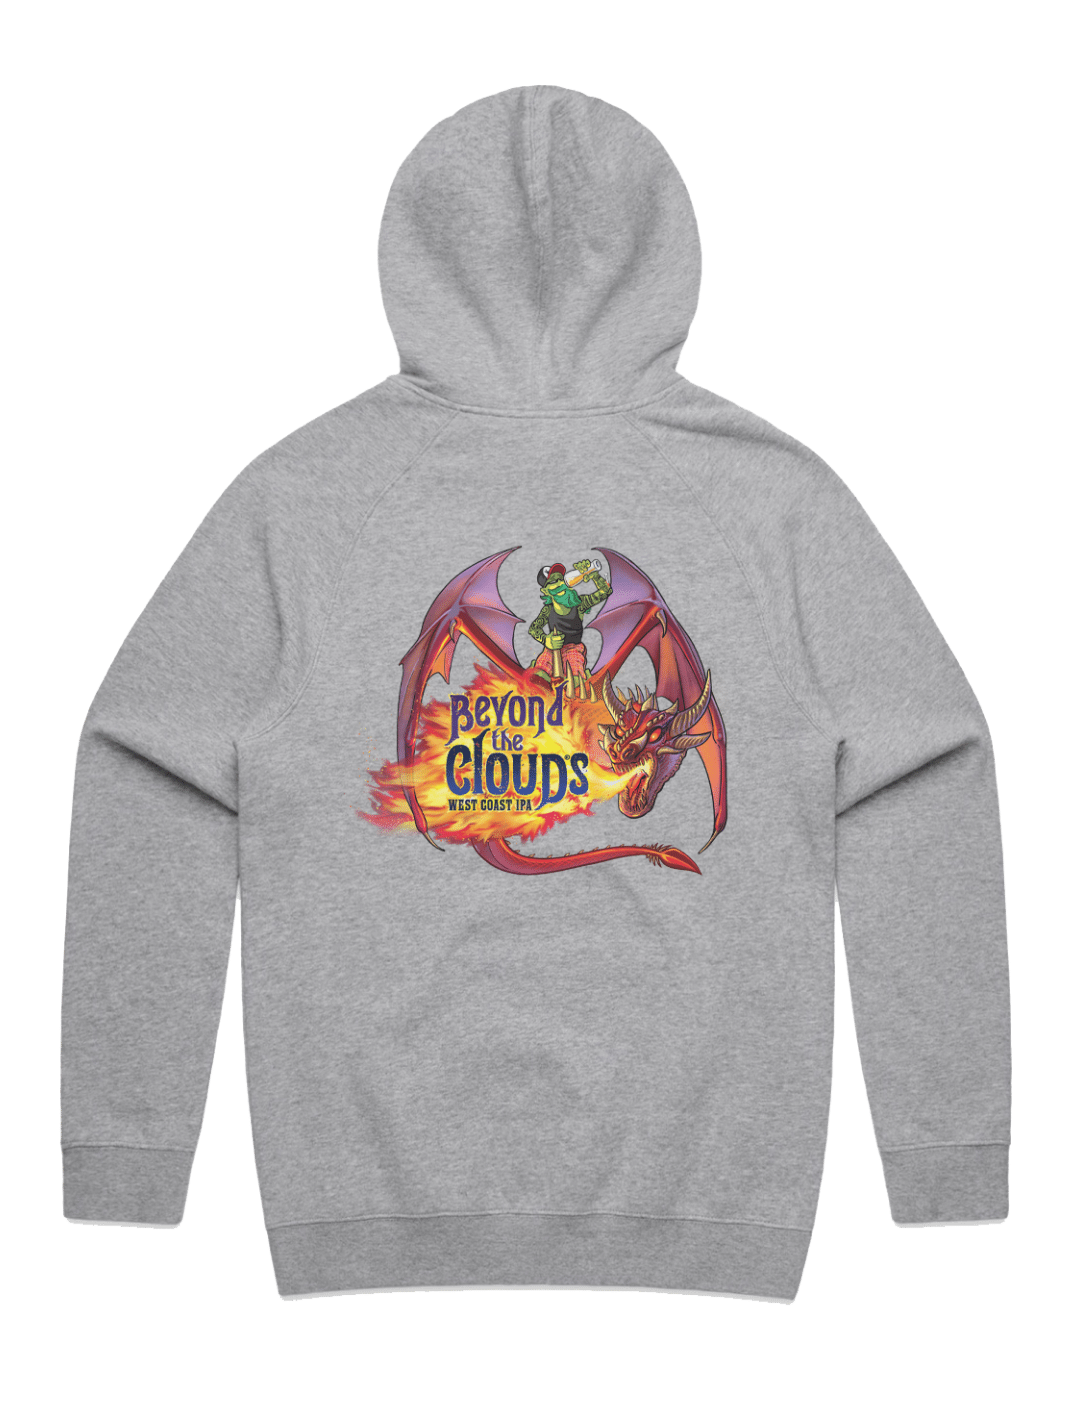 Bach Brewing Hoody - Beyond the Clouds